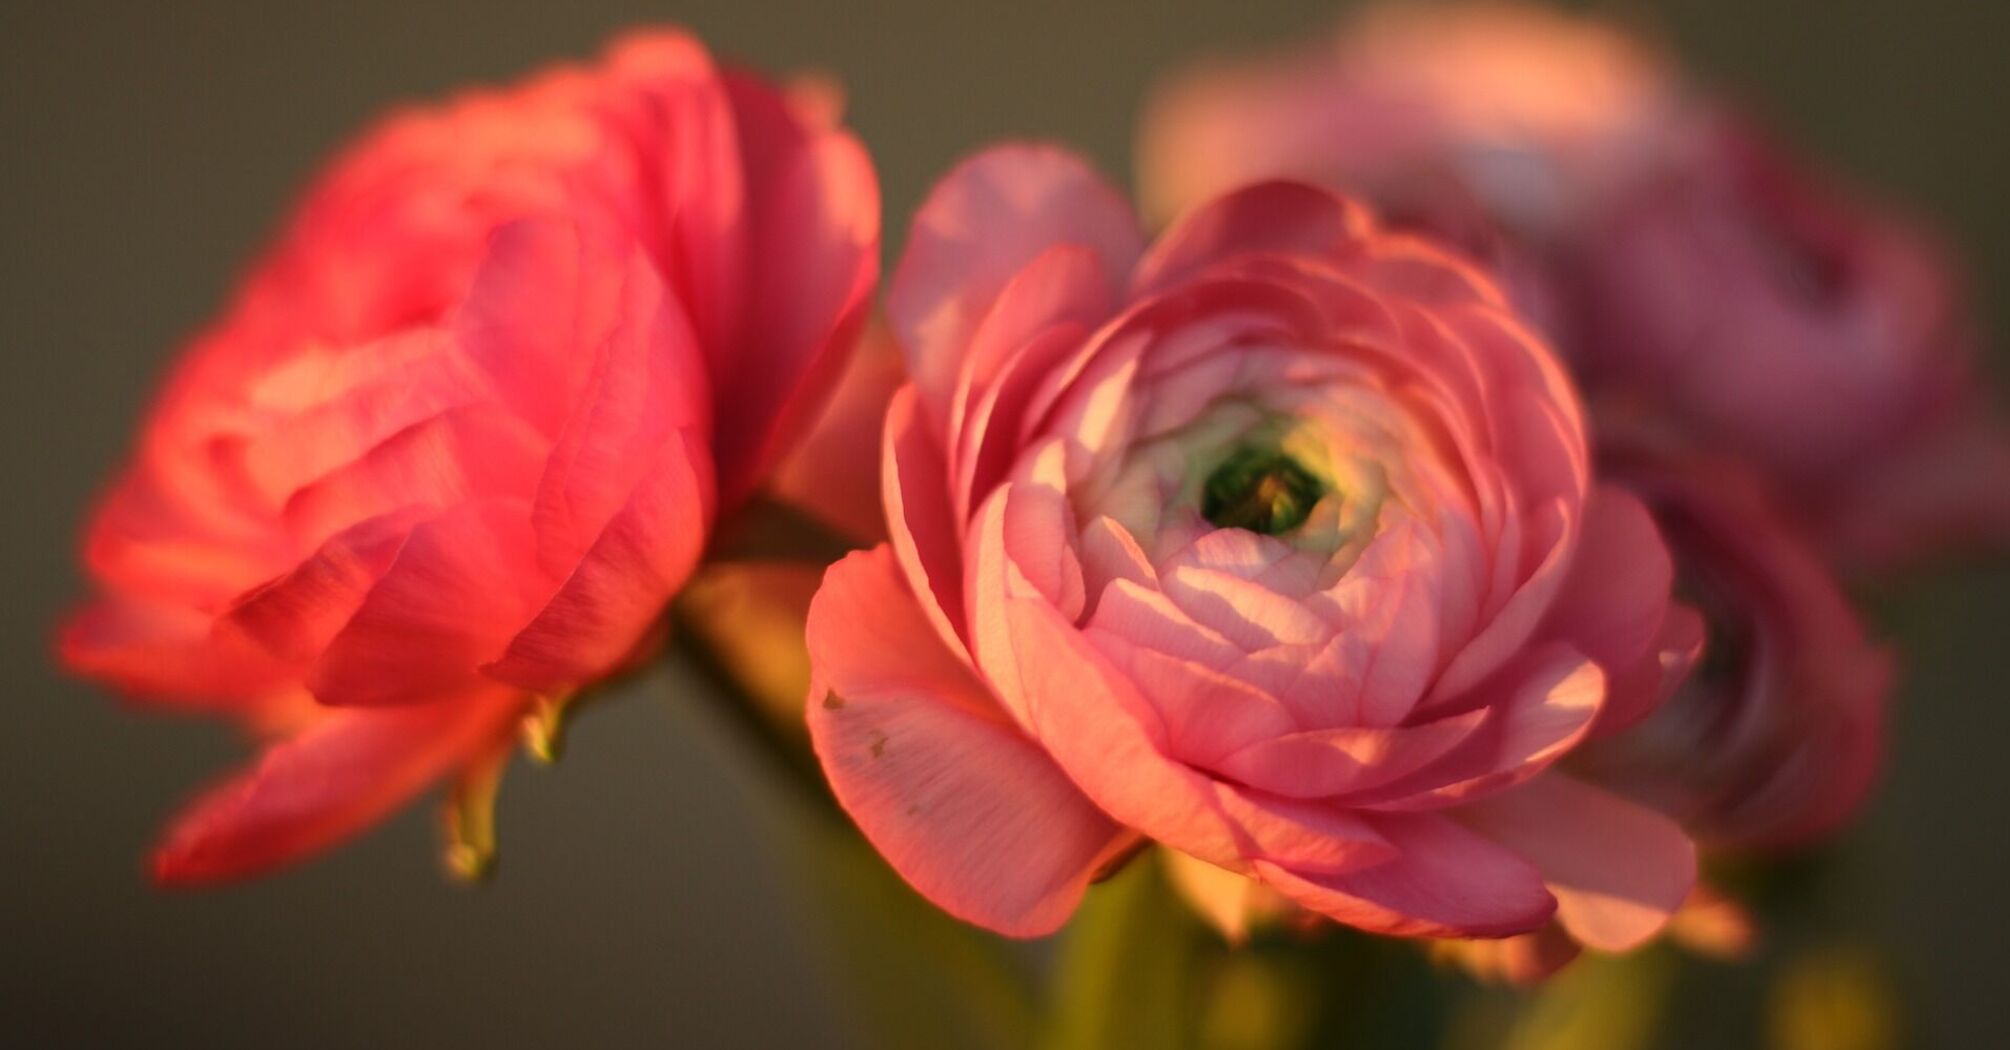 The flower that everyone dreams of: how to grow aesthetic ranunculus at home